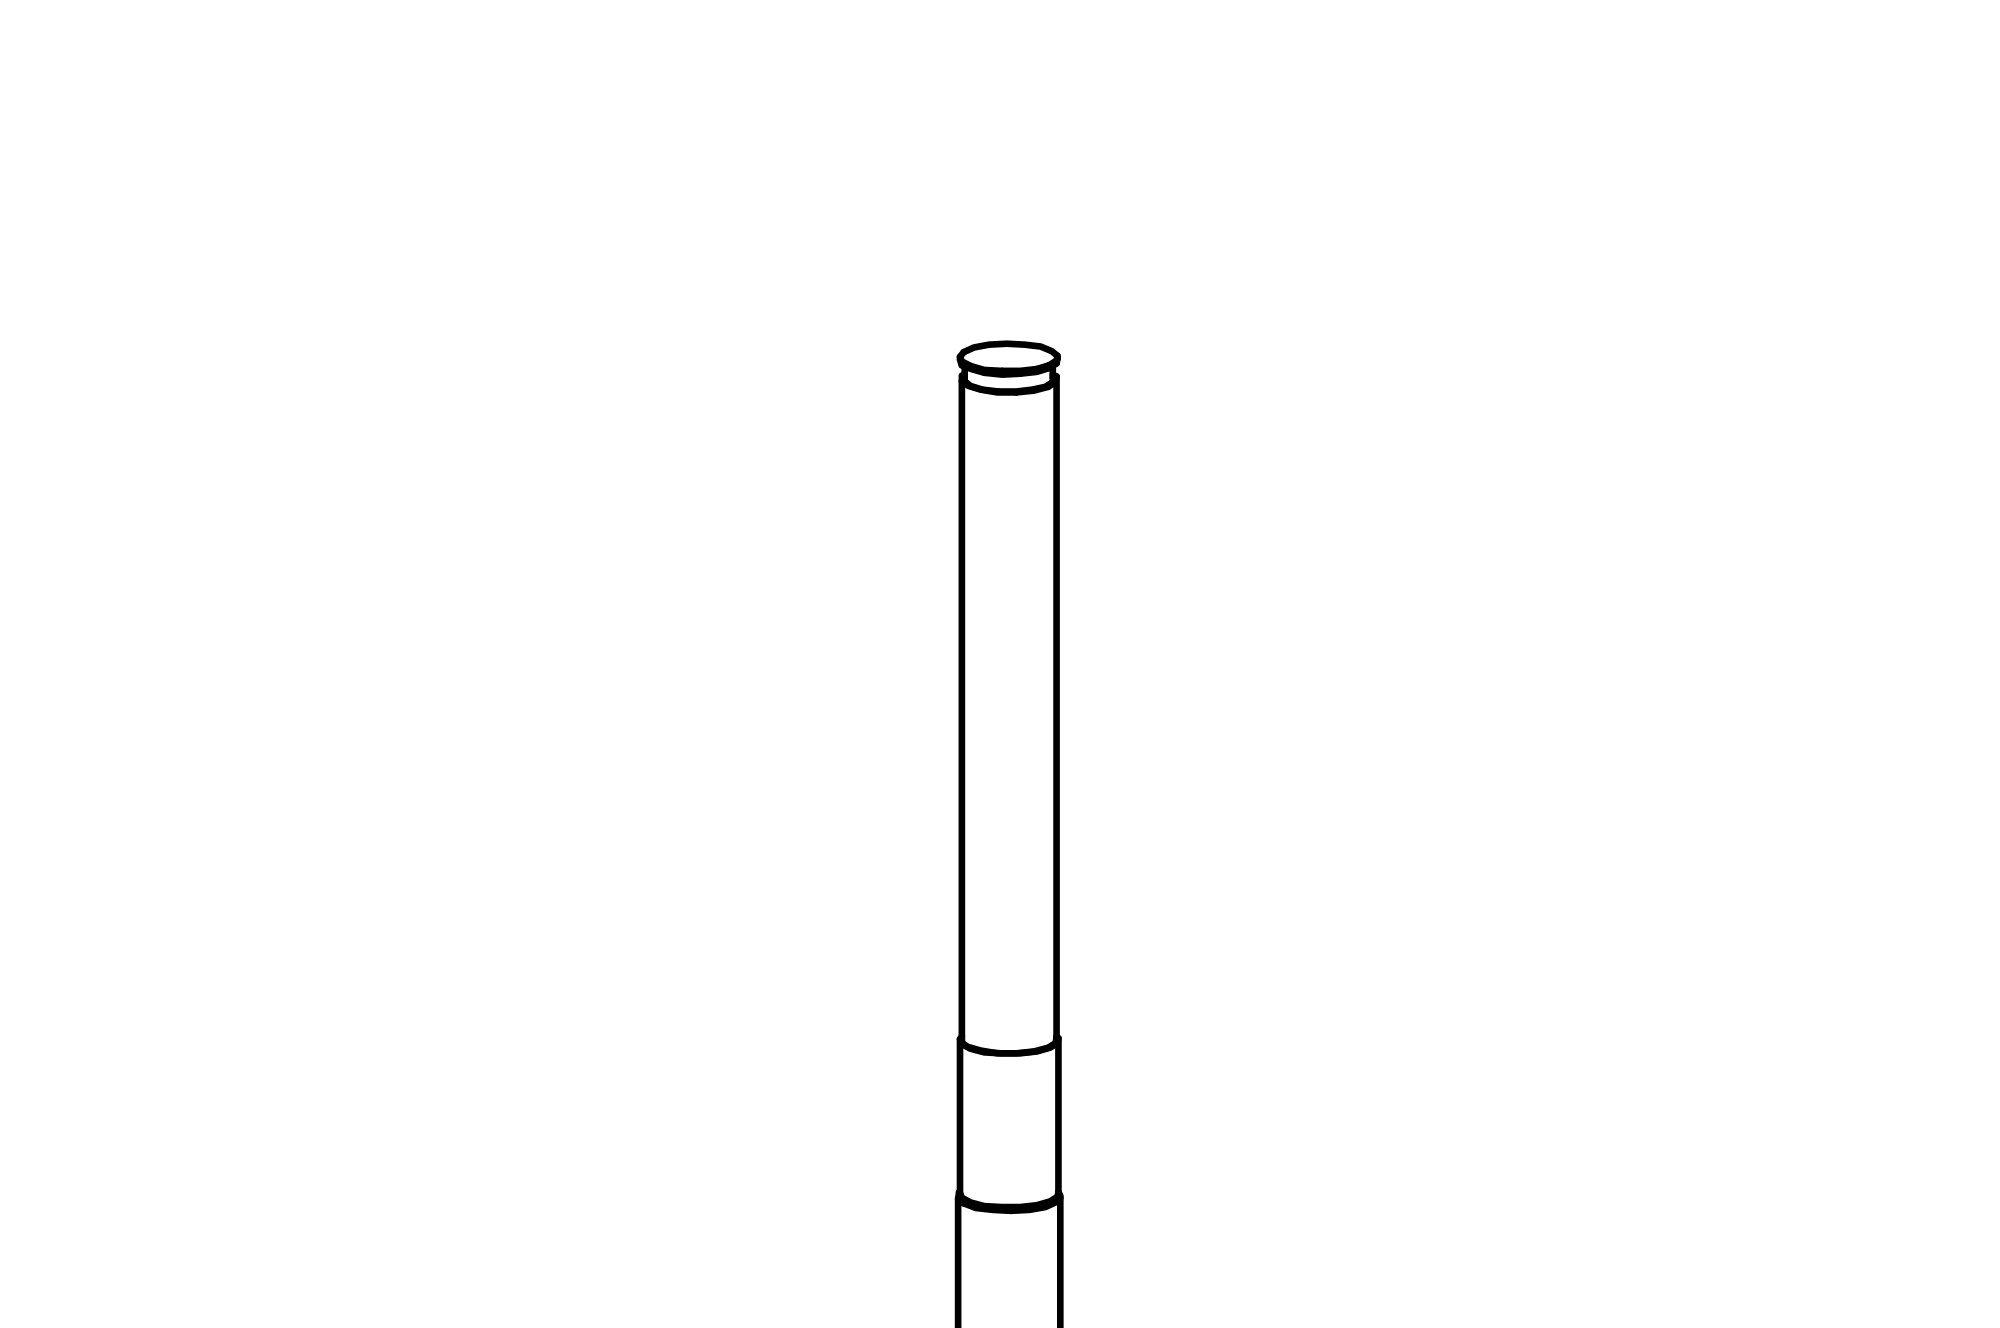 Reservoir – Mast made of larch